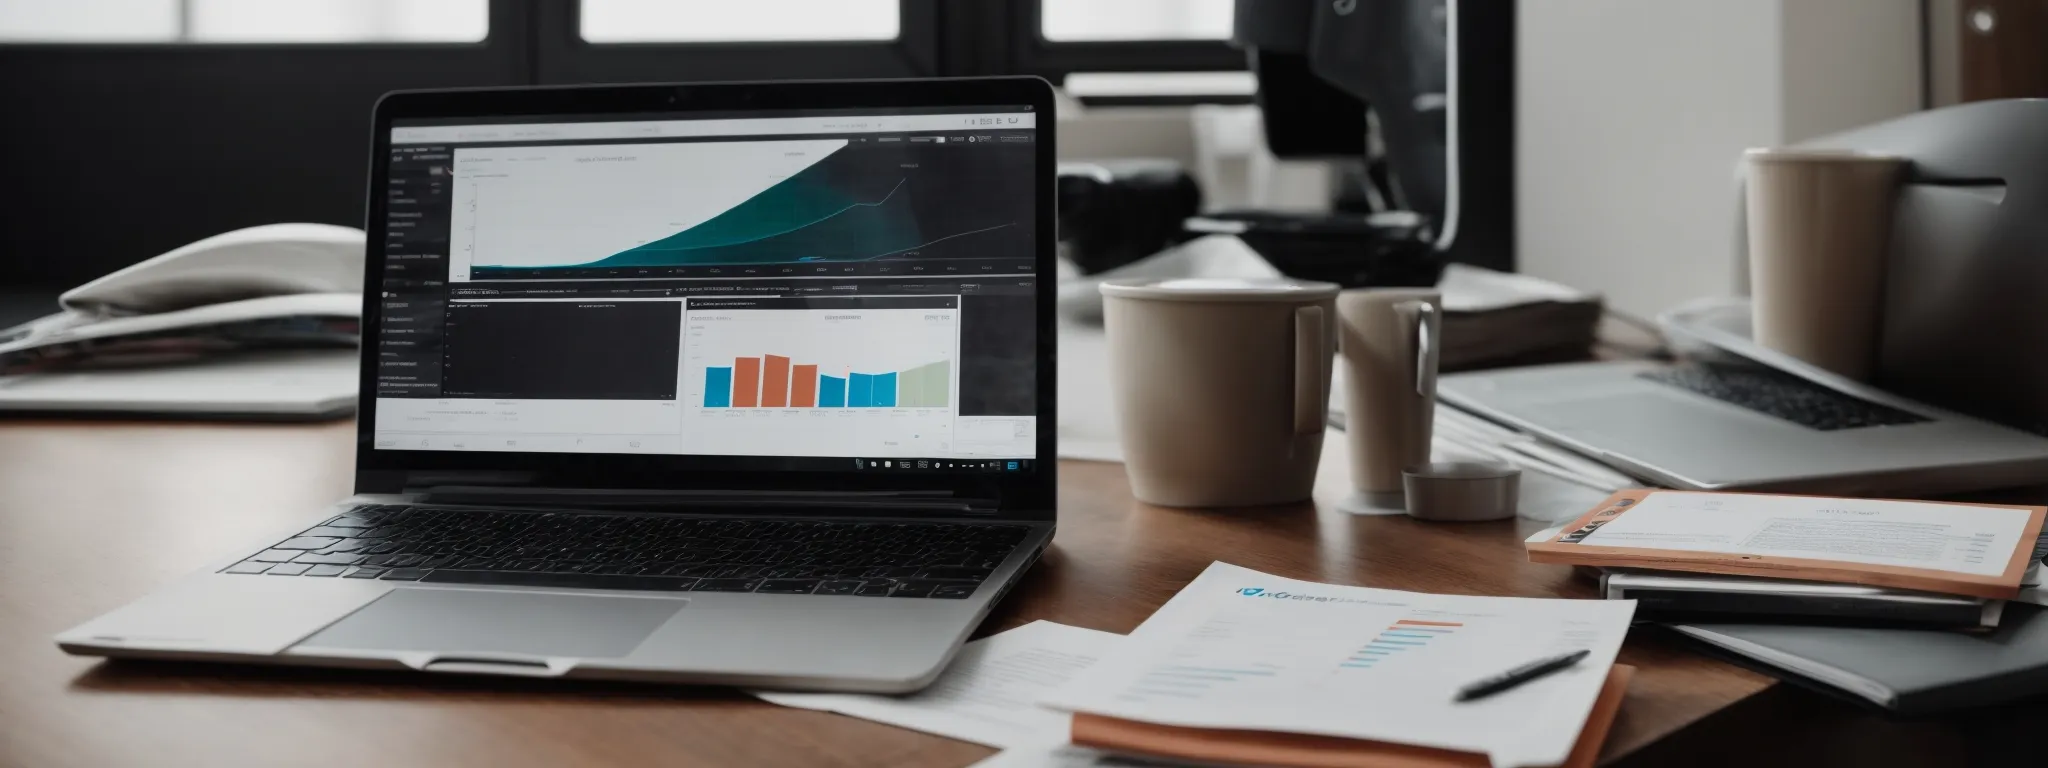 a laptop with graphs and analytics on the screen sits atop a desk surrounded by marketing strategy reports and a cup of coffee.